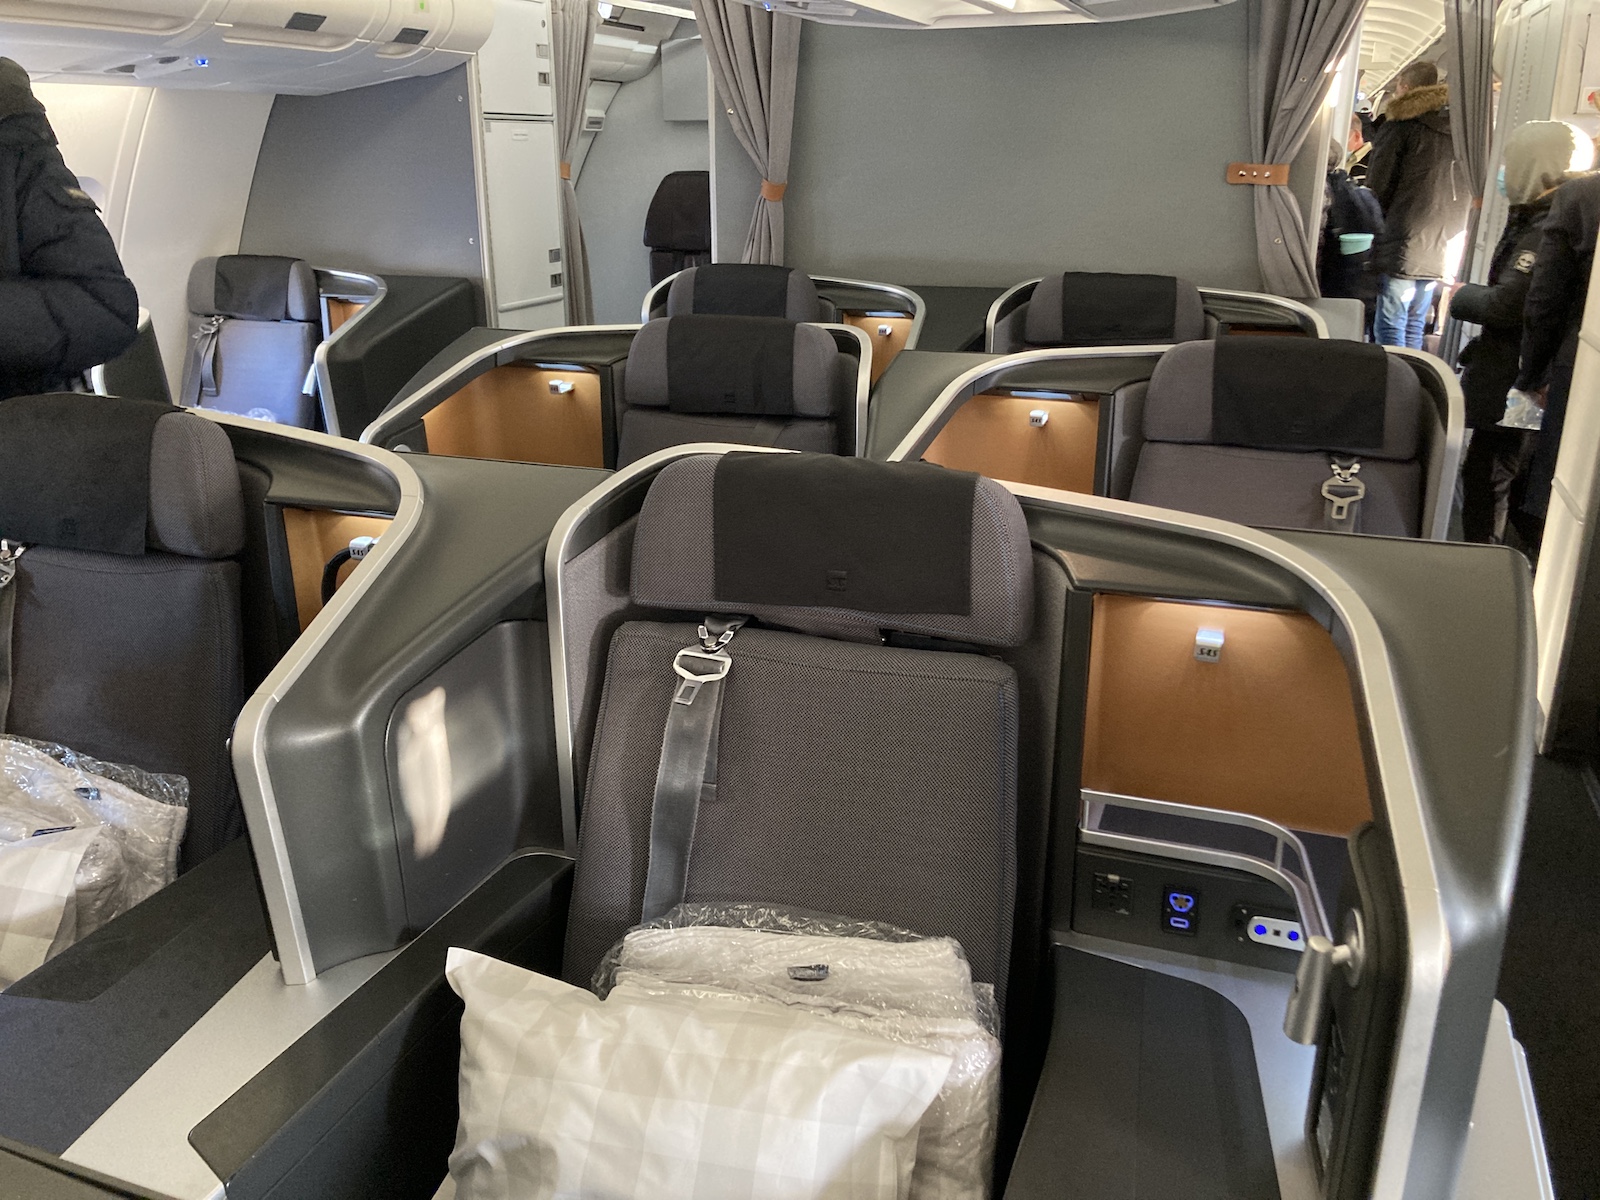 Image of SAS A330 business class cabin